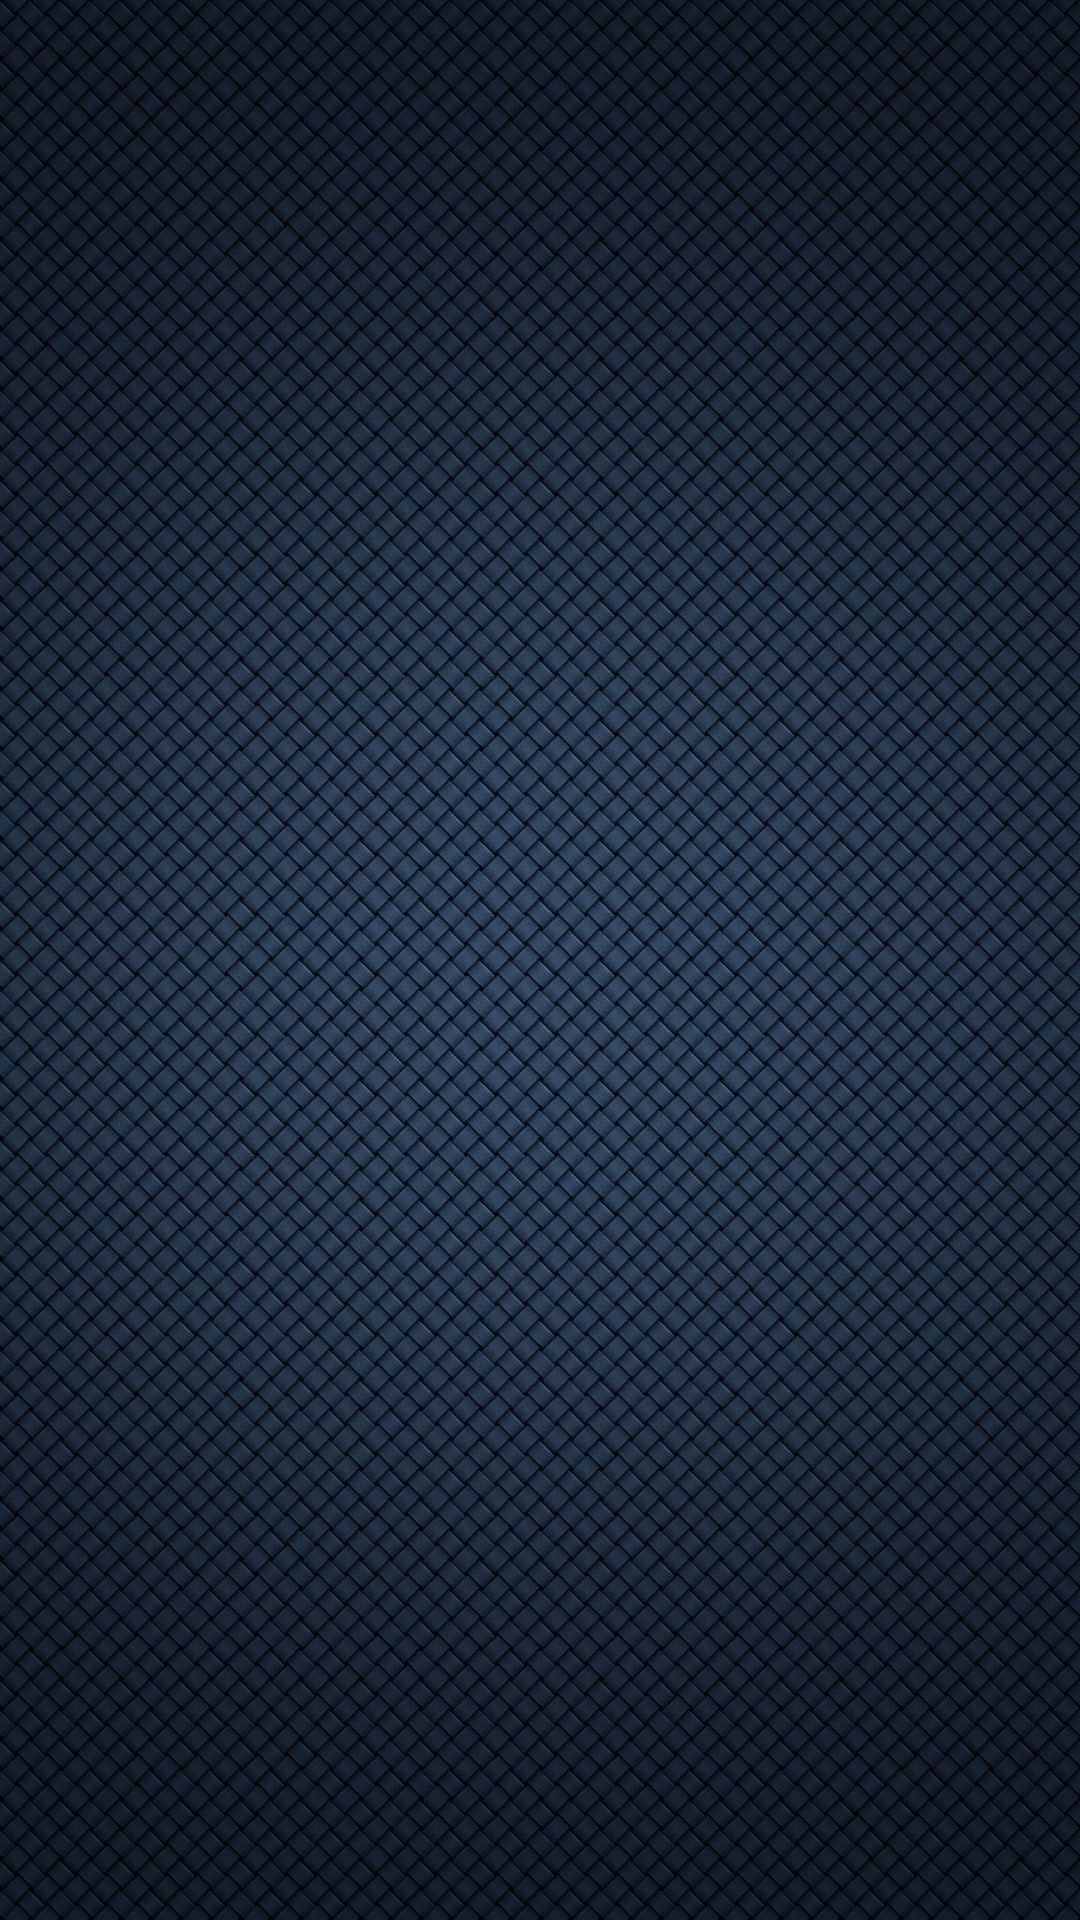 Galaxy S4 Wallpaper with Blue Linen Texture in 1080x1920 resolution